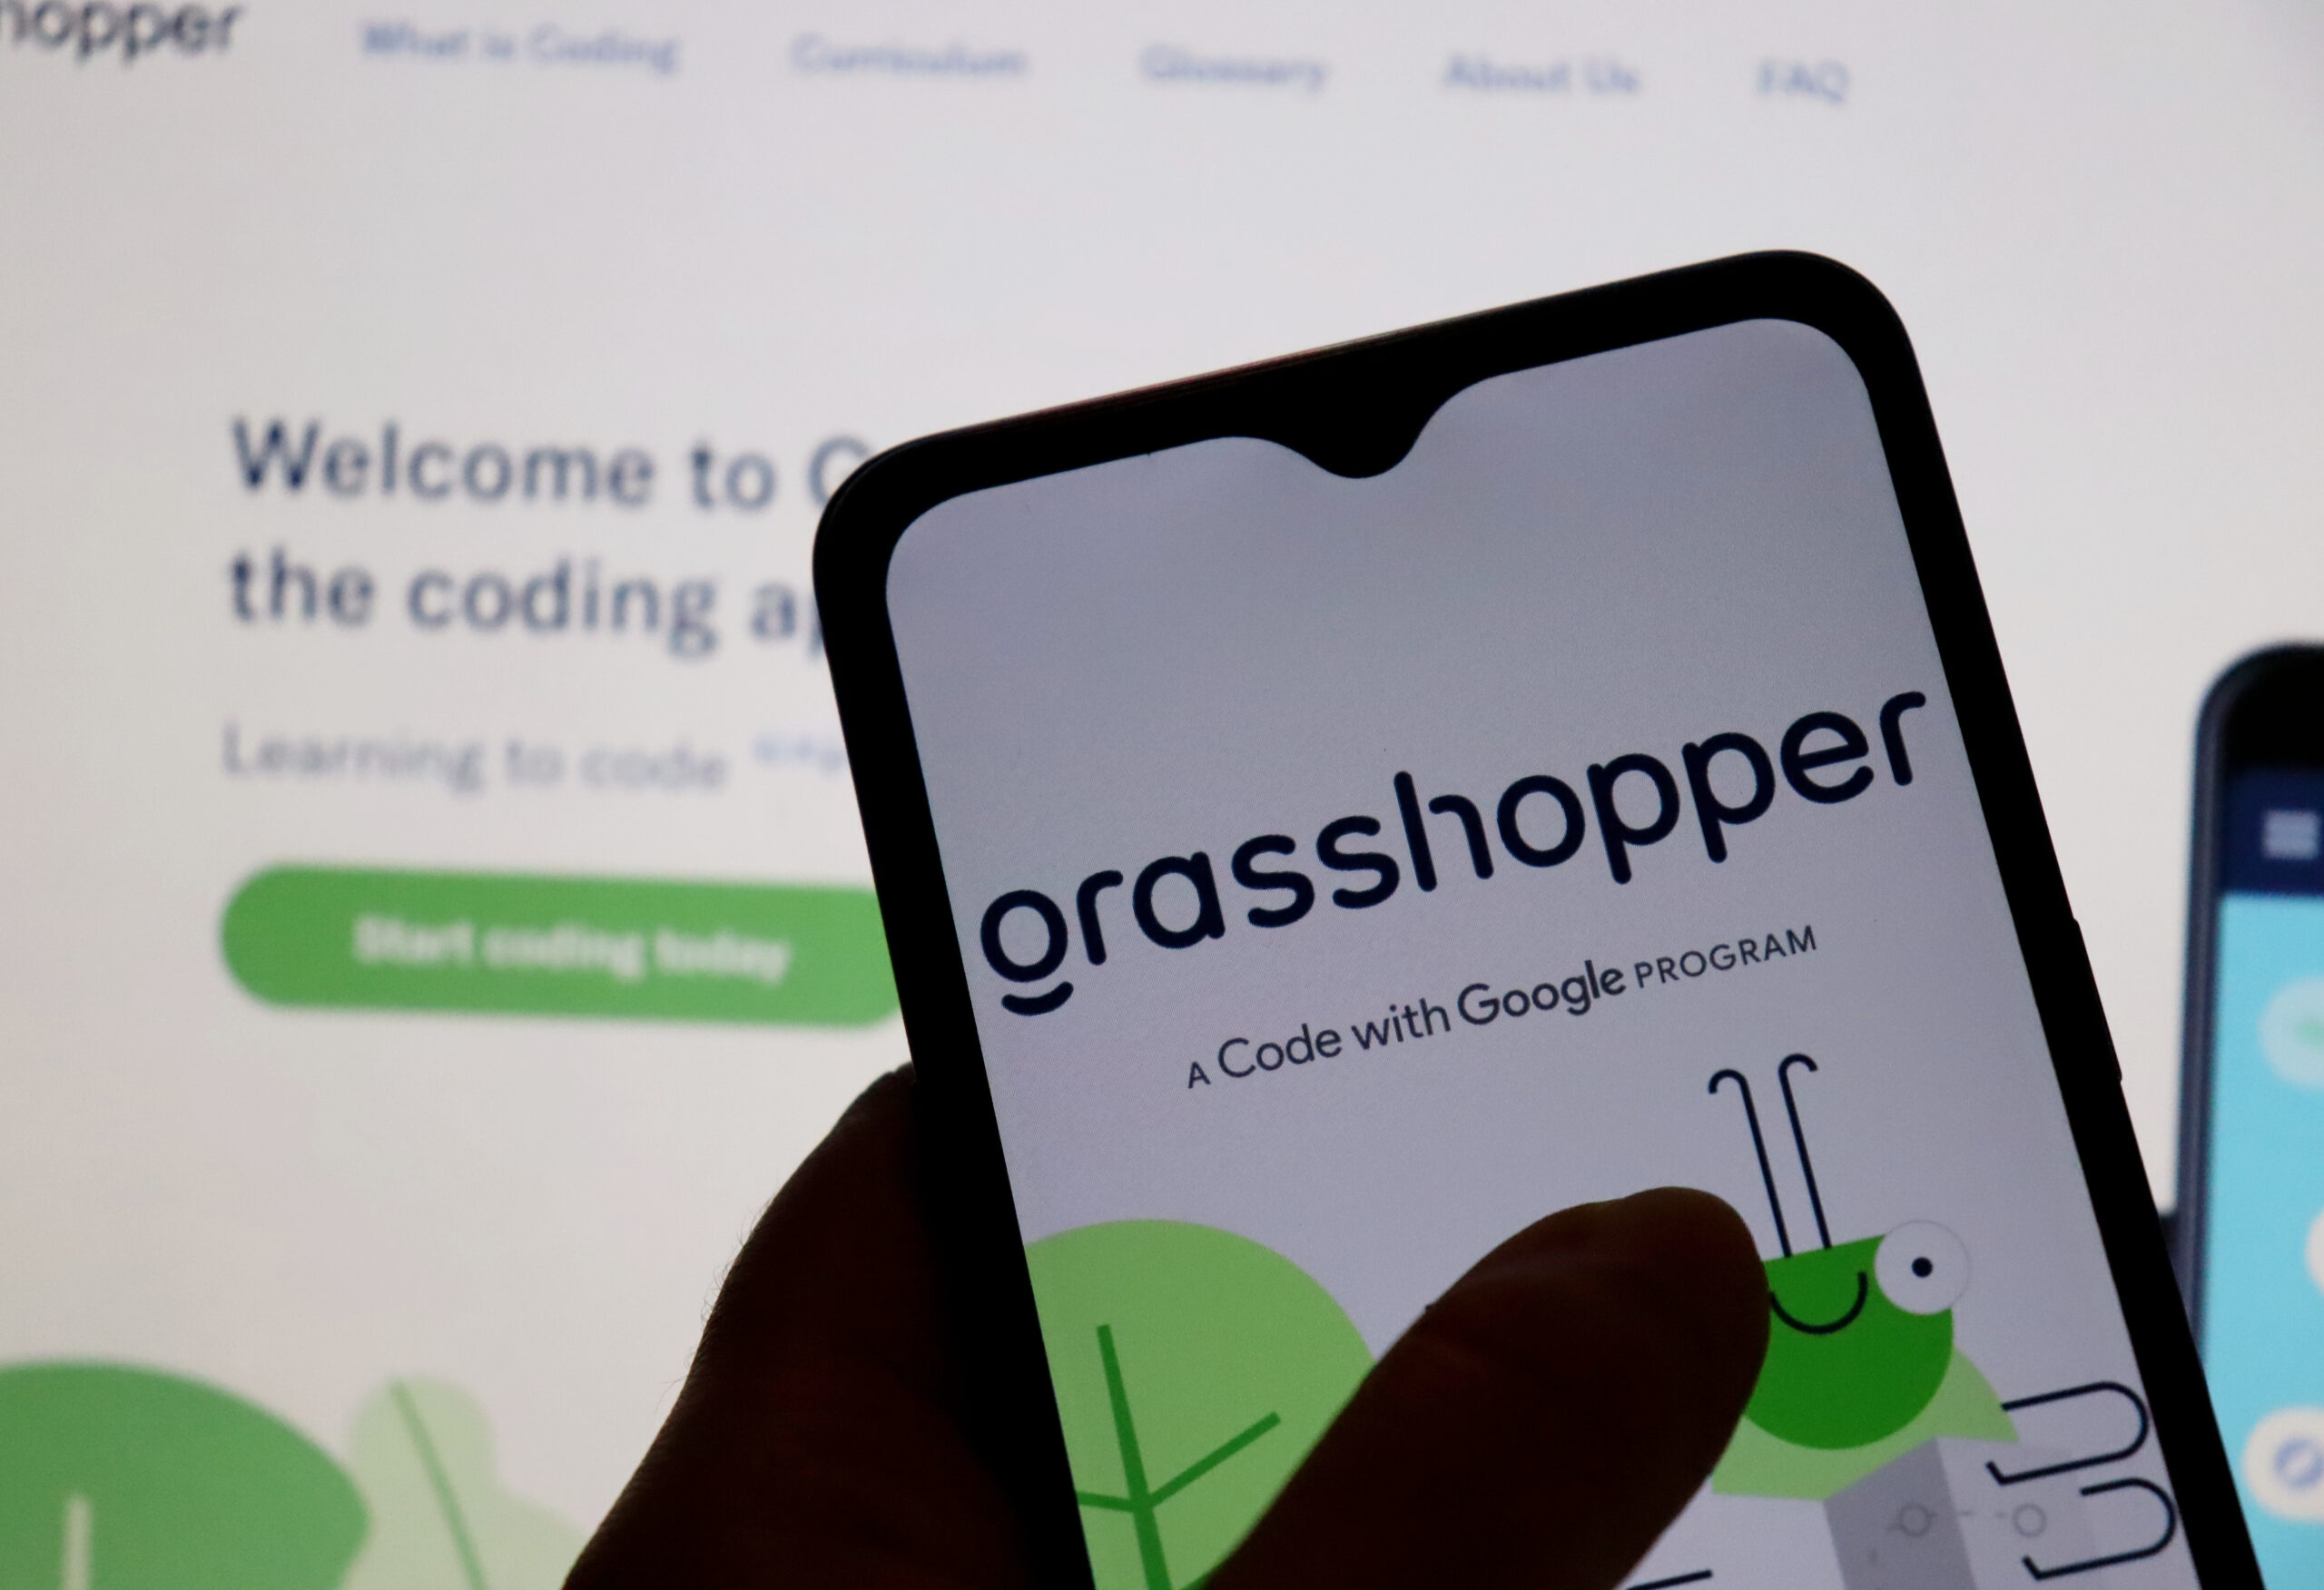 Google suggests that the days of “Grasshopper” may be numbered